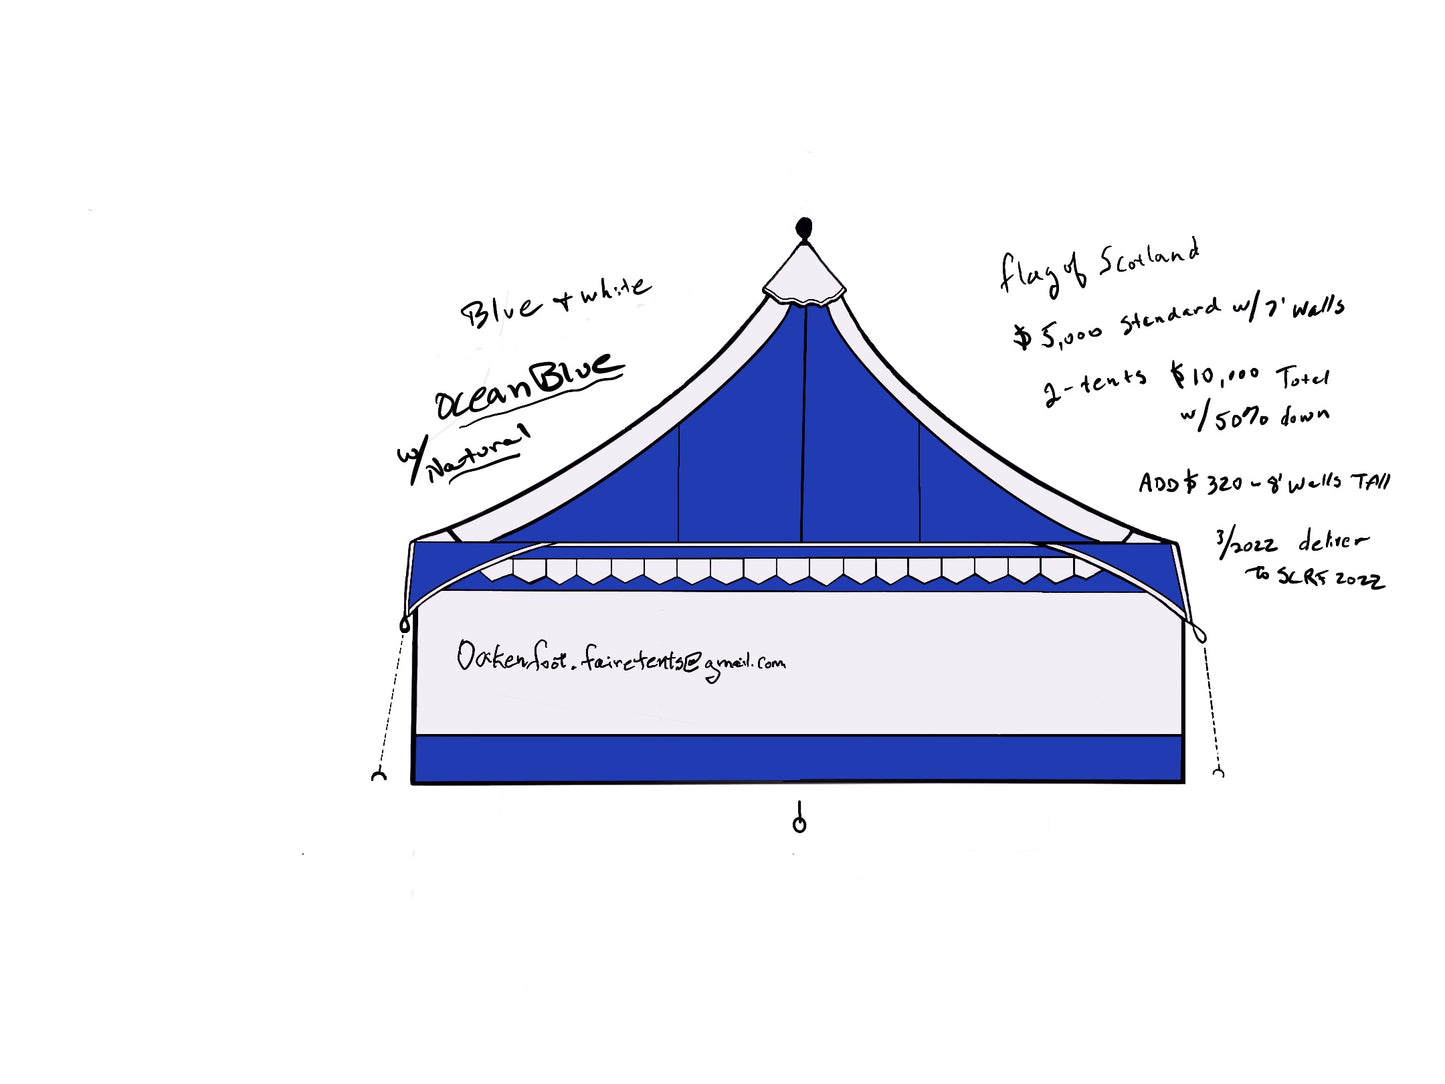 Oakenfoot Faire Tents - 10' & 12-foot square, Flag of Scotland Theme, tent system